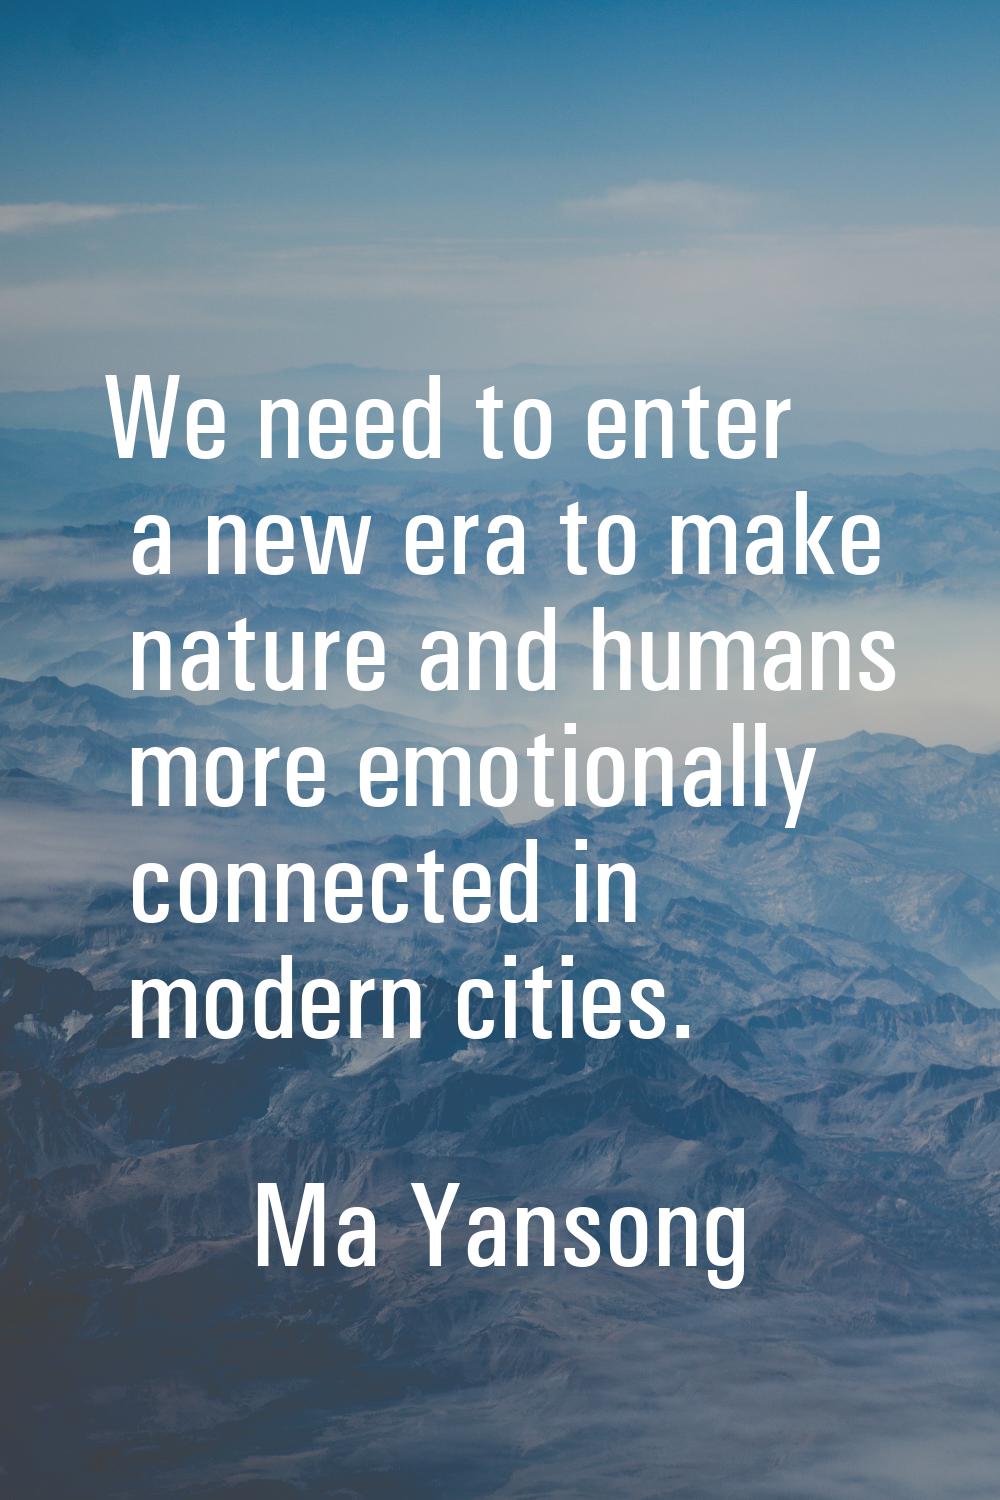 We need to enter a new era to make nature and humans more emotionally connected in modern cities.